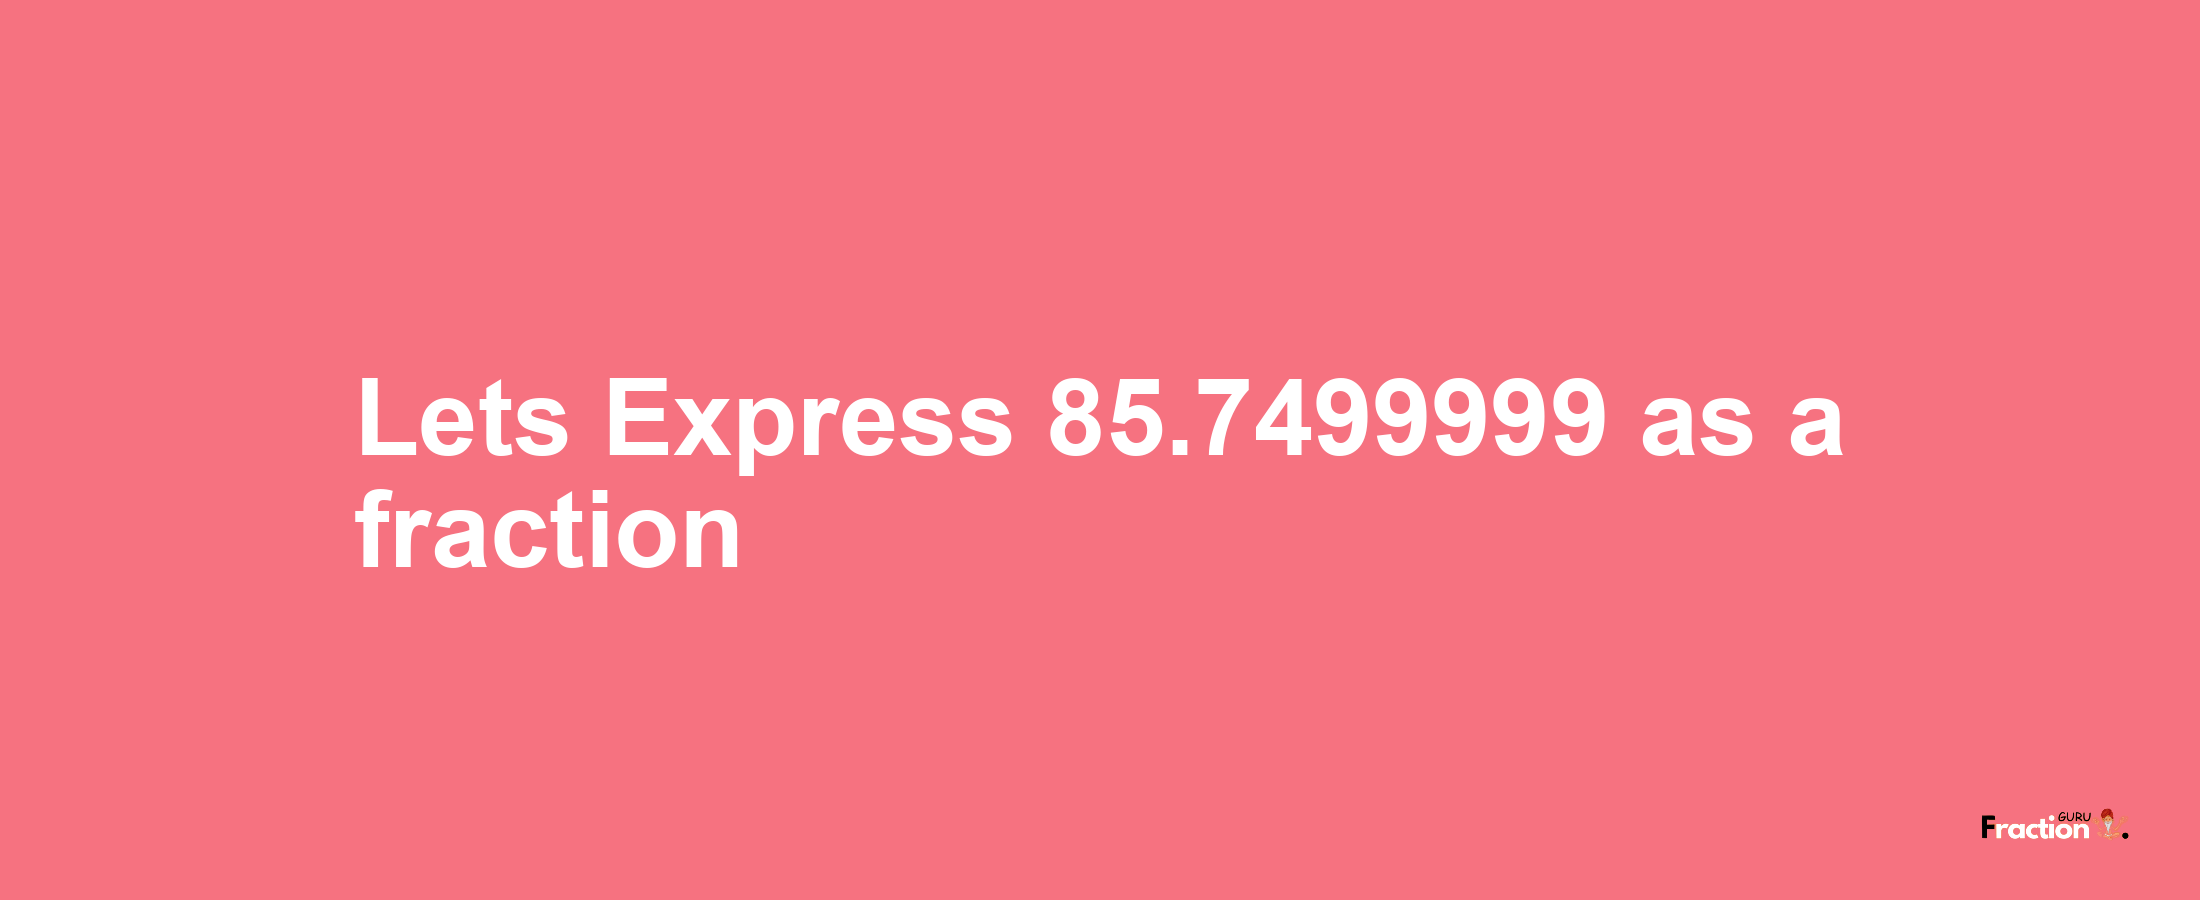 Lets Express 85.7499999 as afraction